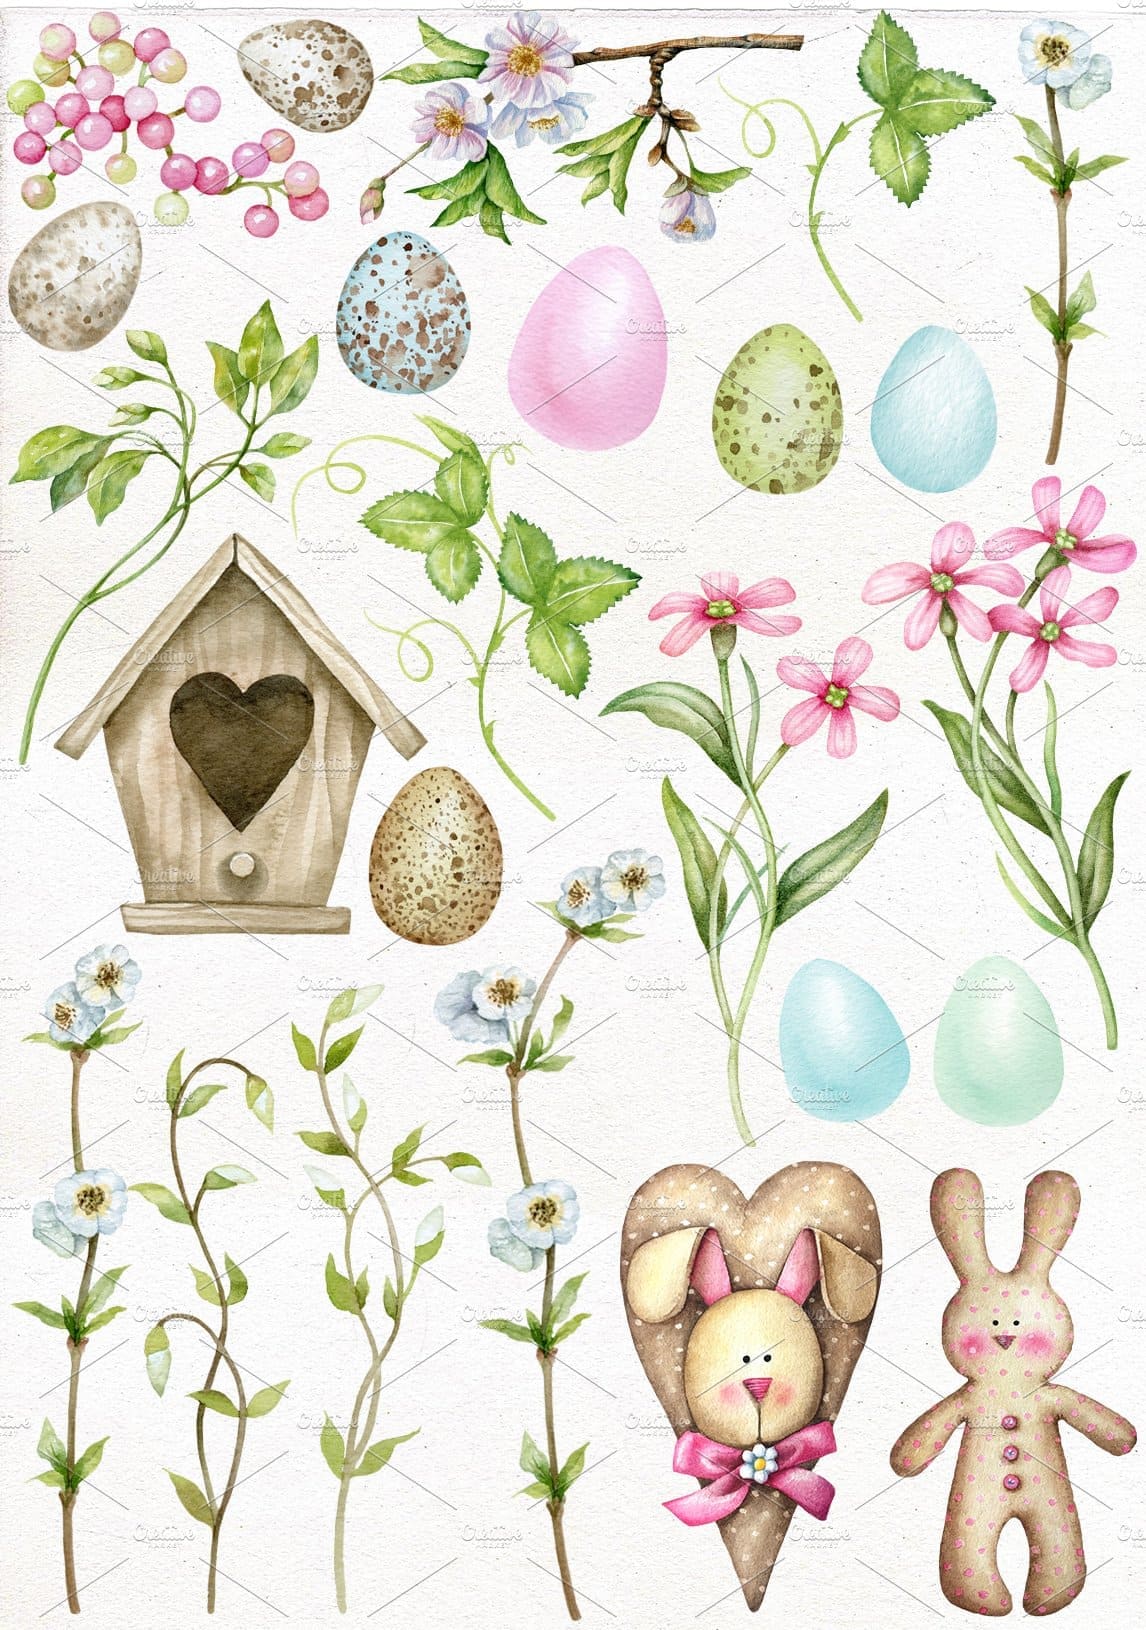 Template preview "Easter Decor on white background".